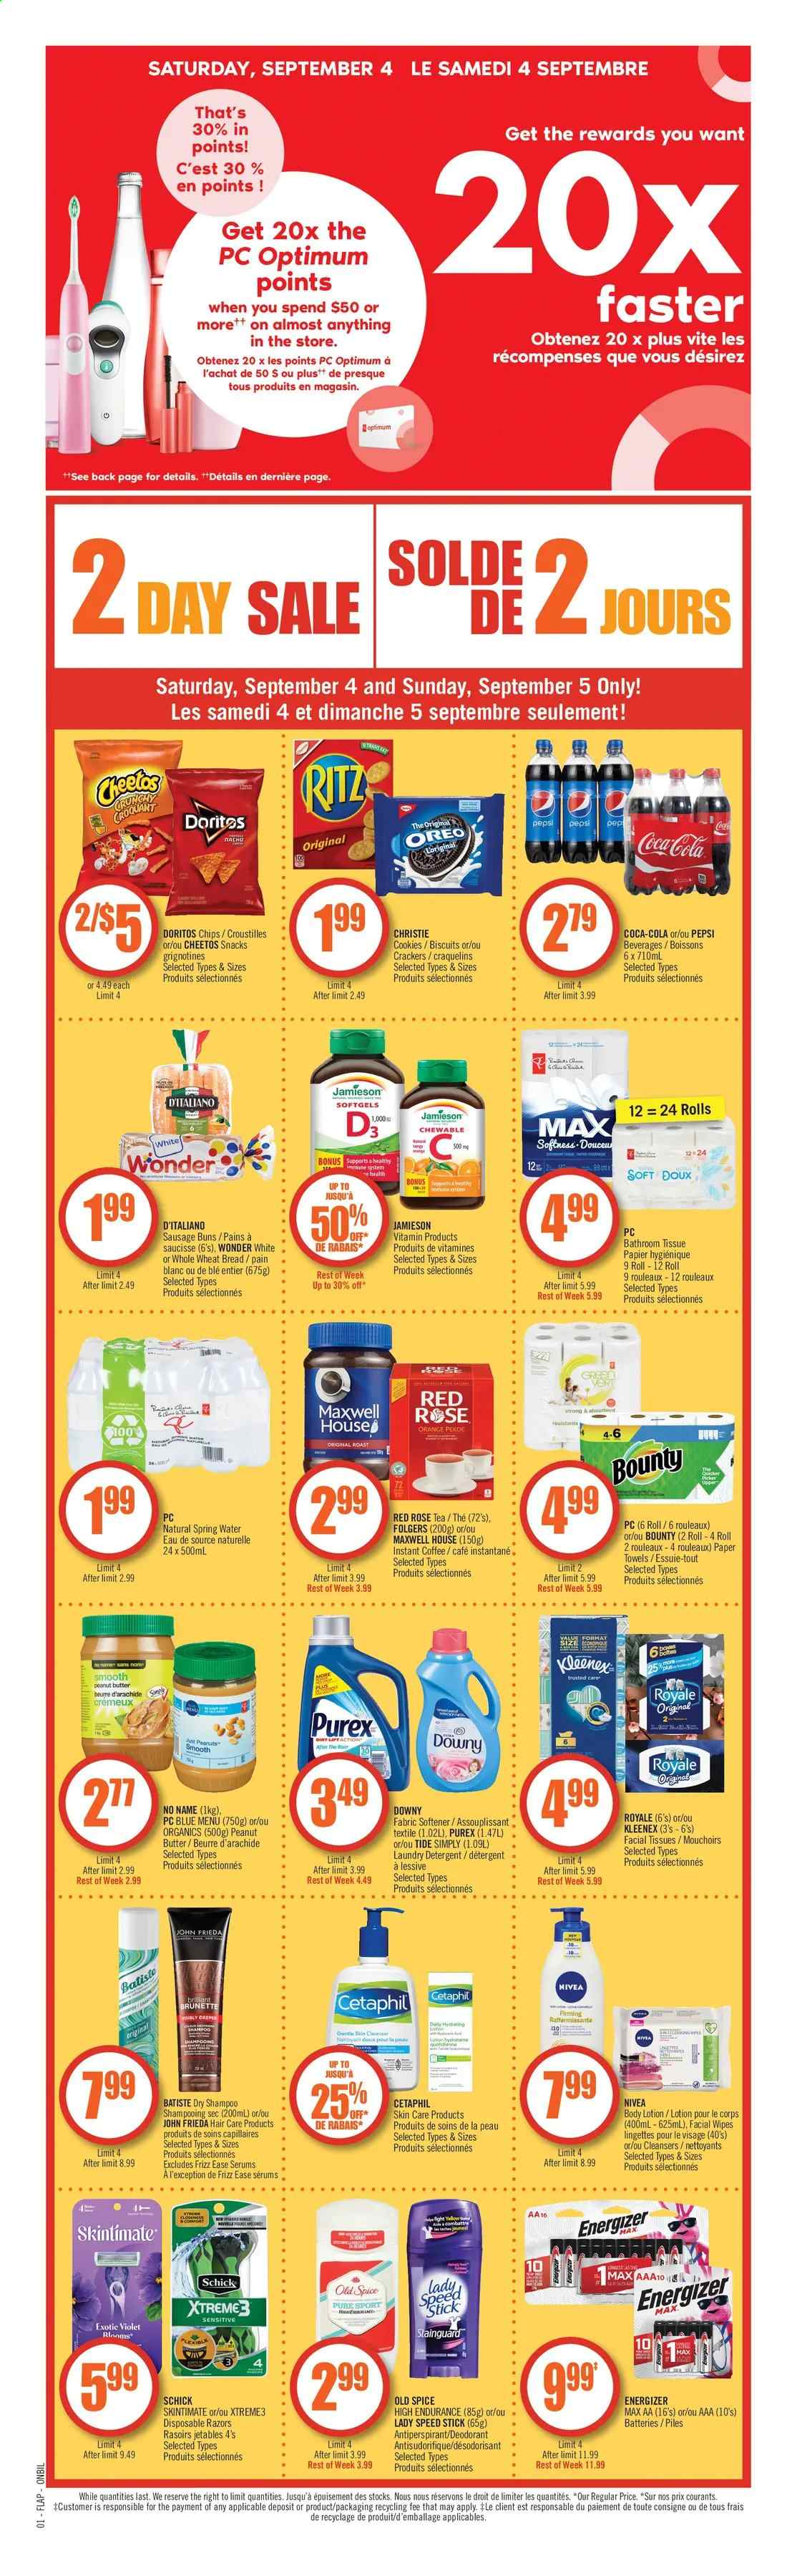 thumbnail - Shoppers Drug Mart Flyer - September 04, 2021 - September 10, 2021 - Sales products - cookies, snack, Bounty, crackers, biscuit, RITZ, Doritos, Cheetos, spice, peanut butter, peanuts, Coca-Cola, Pepsi, spring water, Maxwell House, tea, instant coffee, Folgers, wipes, bath tissue, Kleenex, kitchen towels, paper towels, Tide, fabric softener, laundry detergent, Purex, Downy Laundry, facial tissues, John Frieda, body lotion, anti-perspirant, Speed Stick, Schick, disposable razor, vitamin D3, Oreo, detergent, Energizer, shampoo, Nivea, Old Spice, chips, deodorant. Page 41.